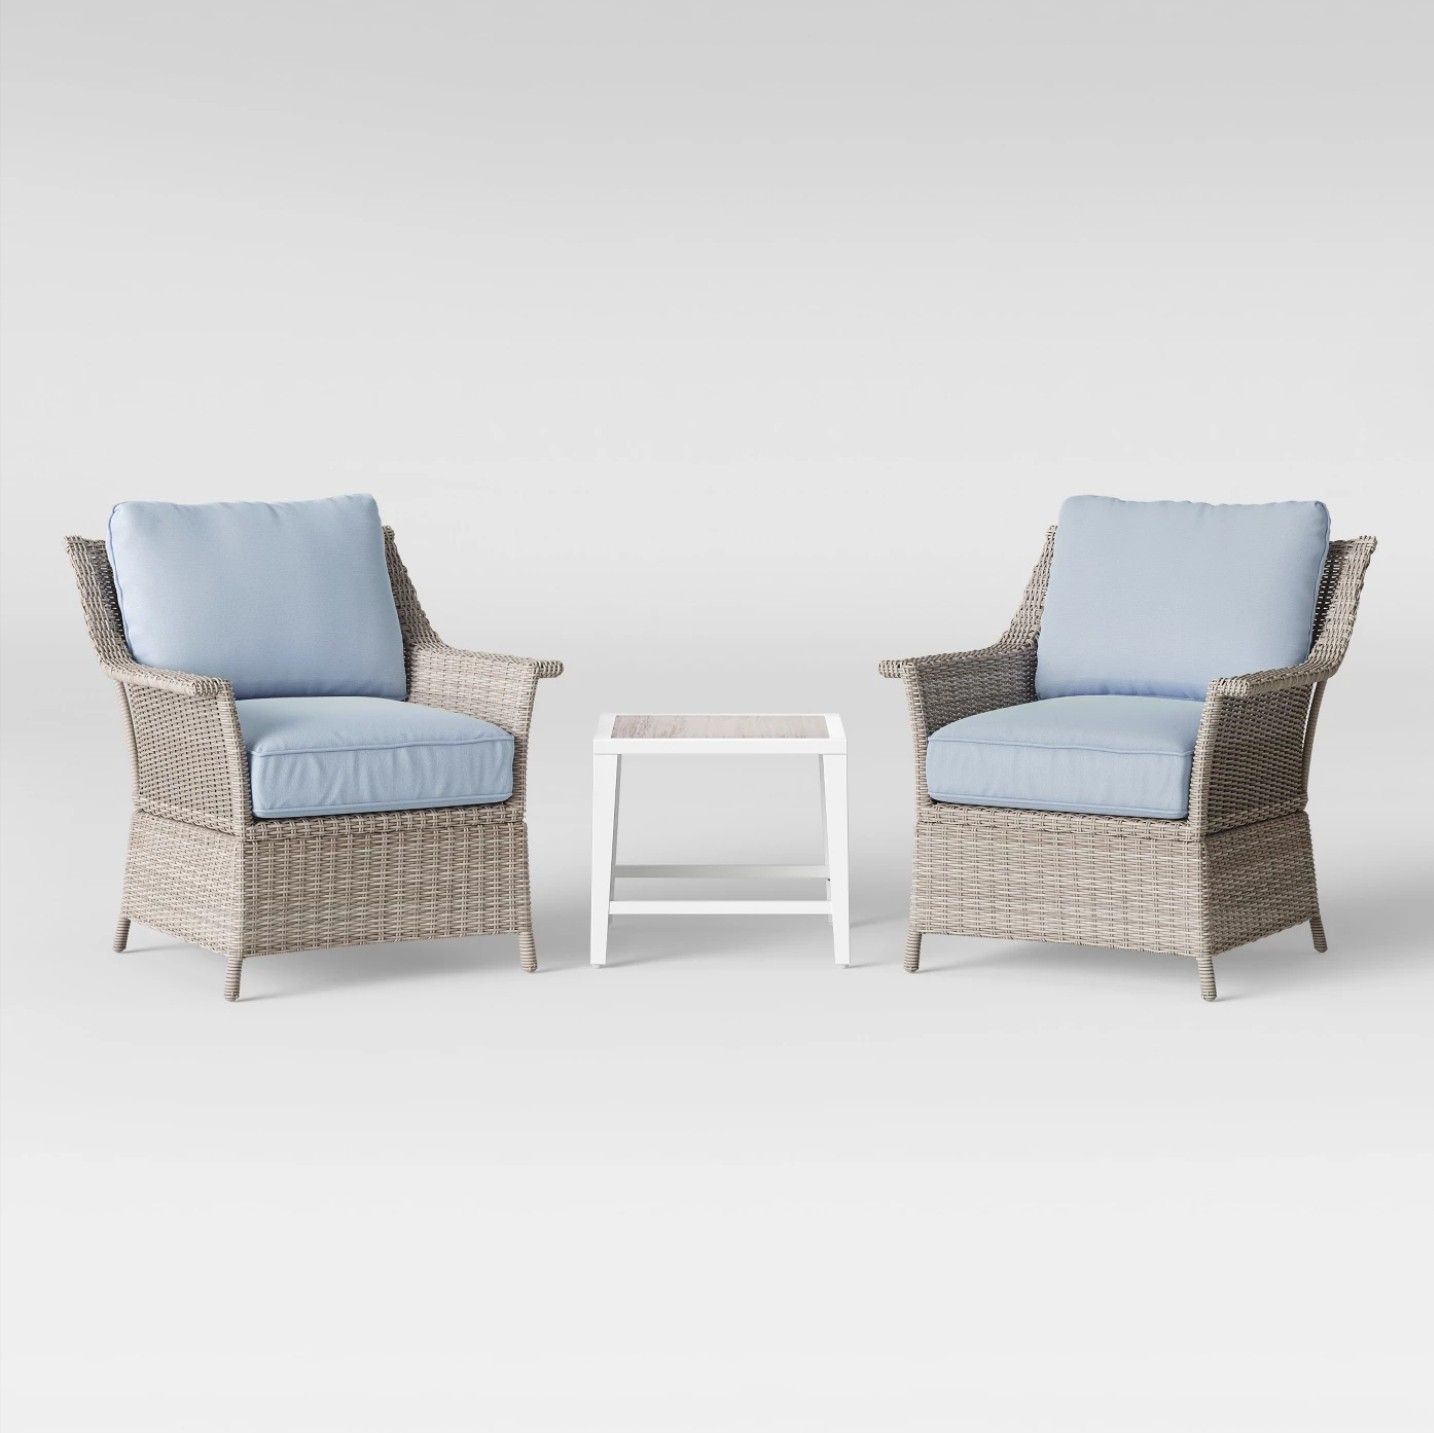 NEW...all-weather 3pc Chat Set With 2-Large chairs with cushions has a beautiful beachy look